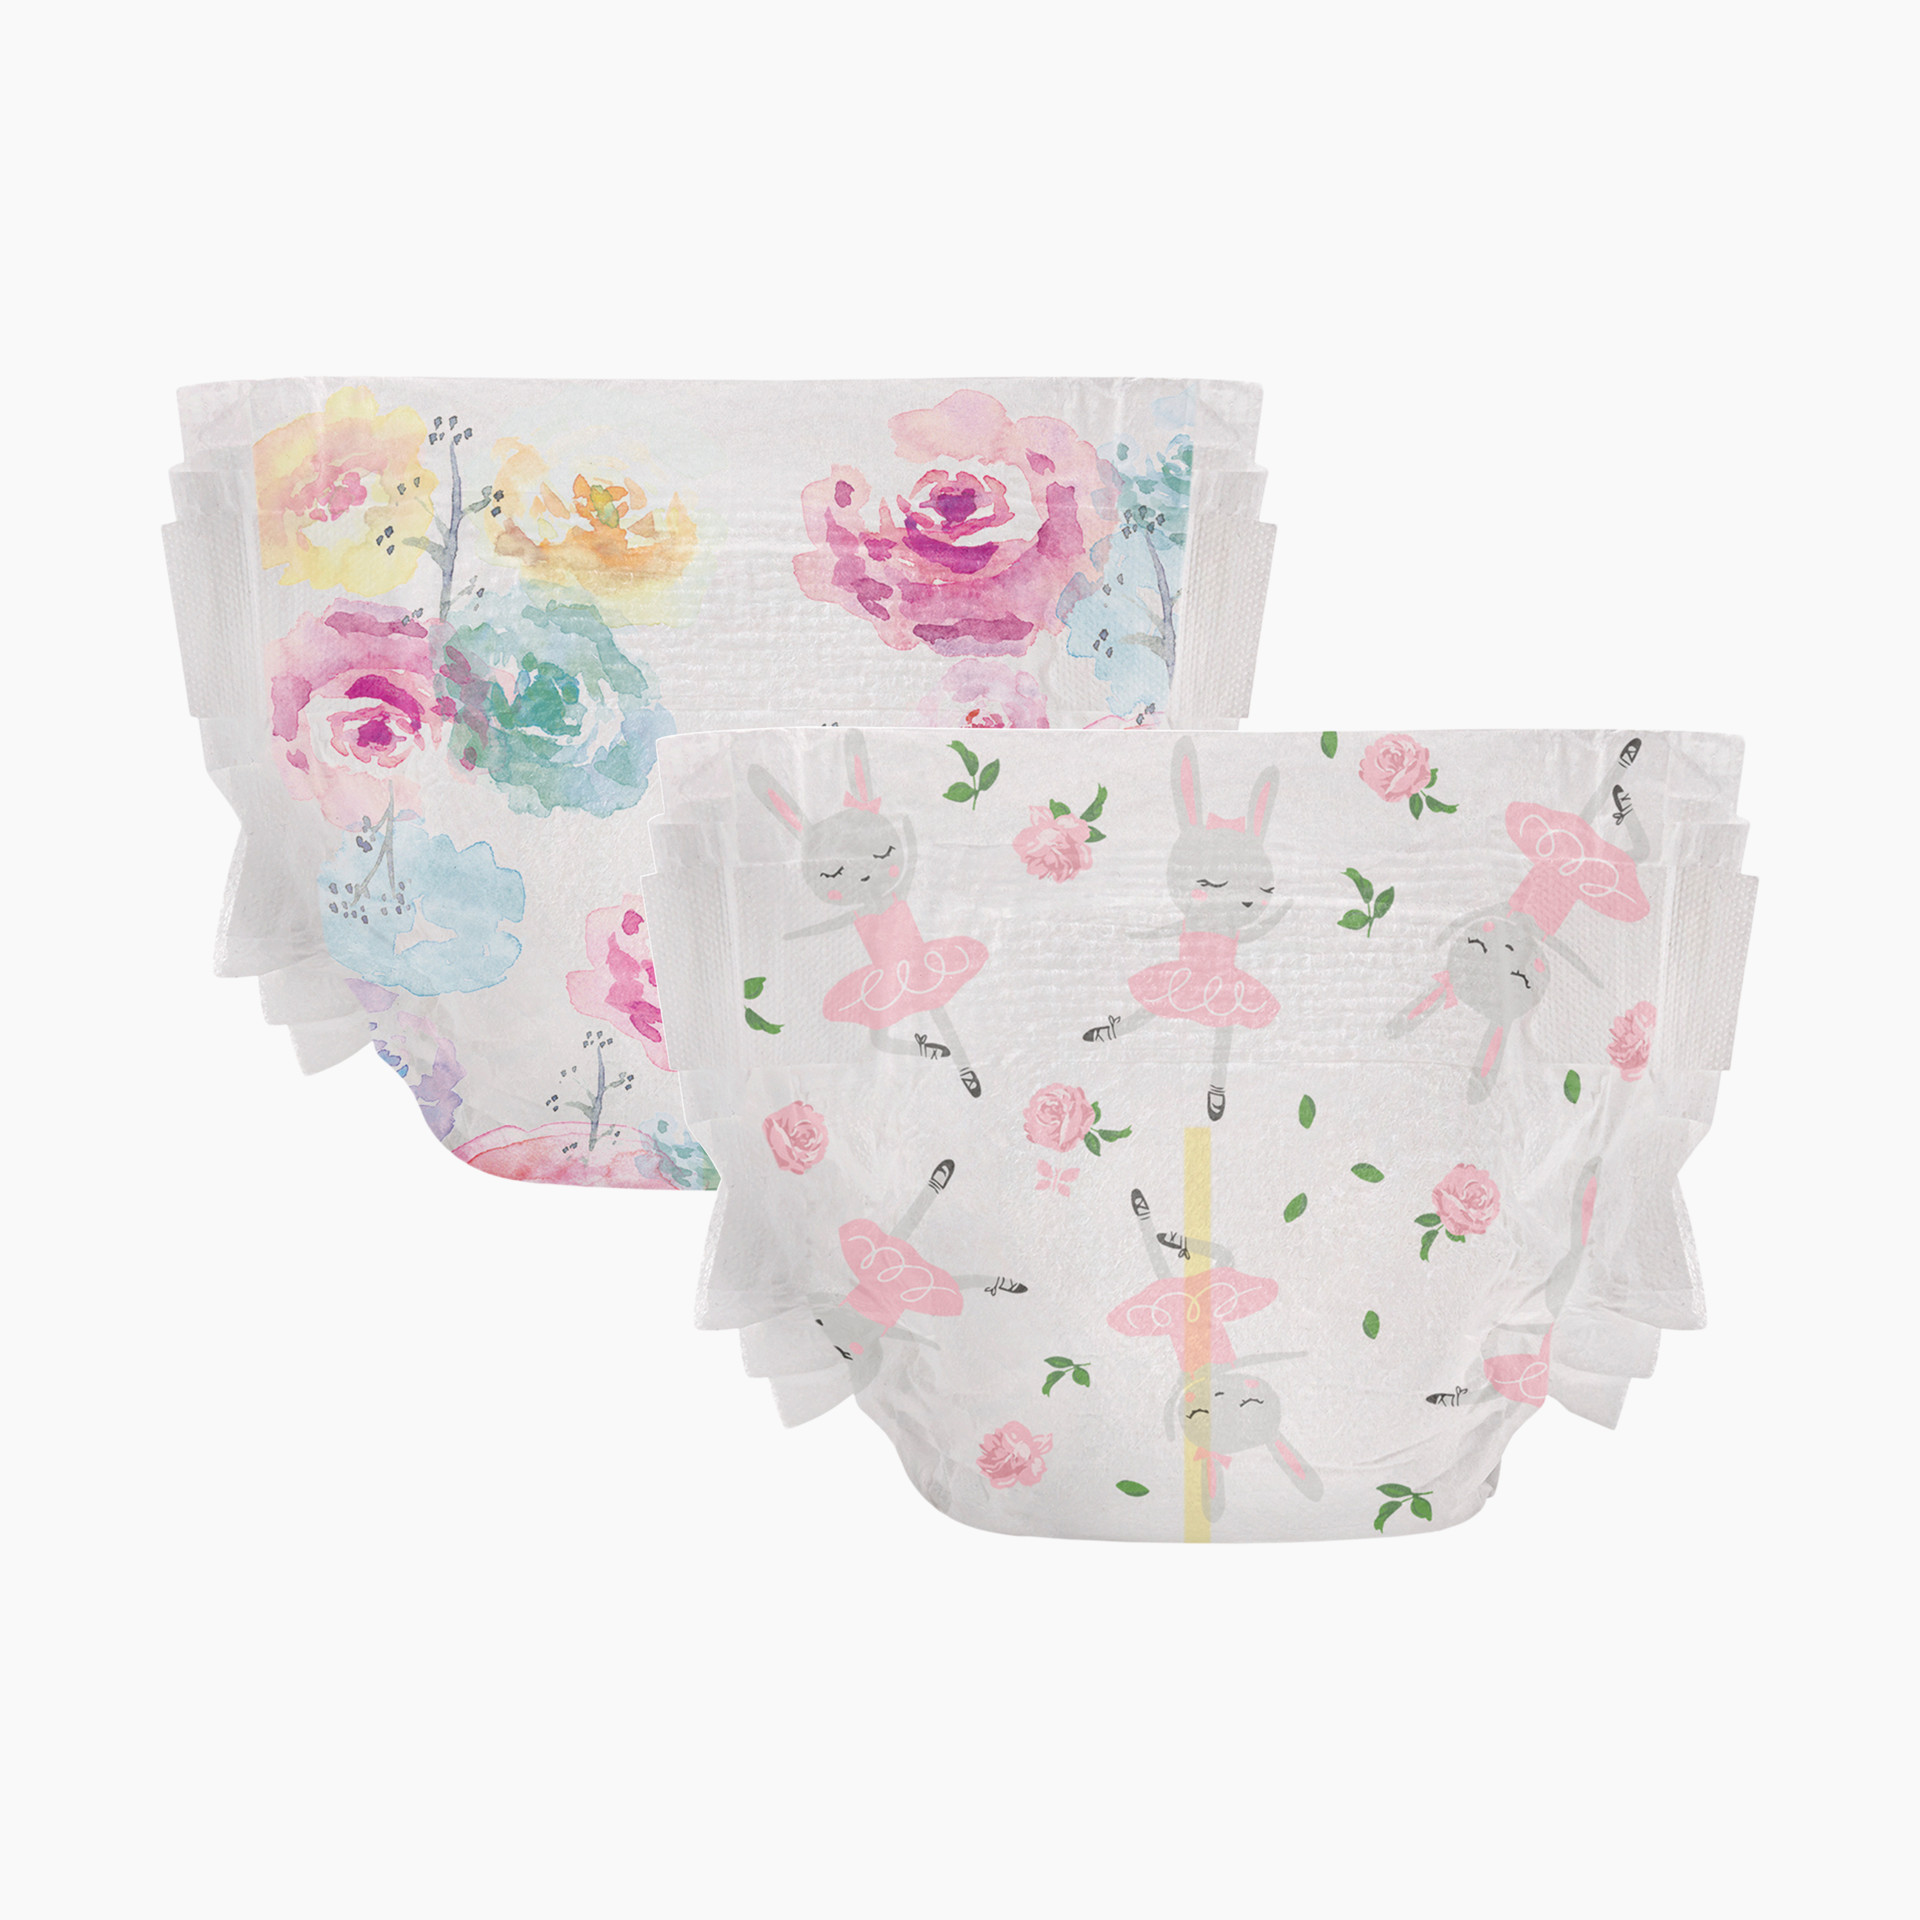 Honest Diapers, Newborn, Less Than 10 Pounds, Rose Blossom, 32 Diapers